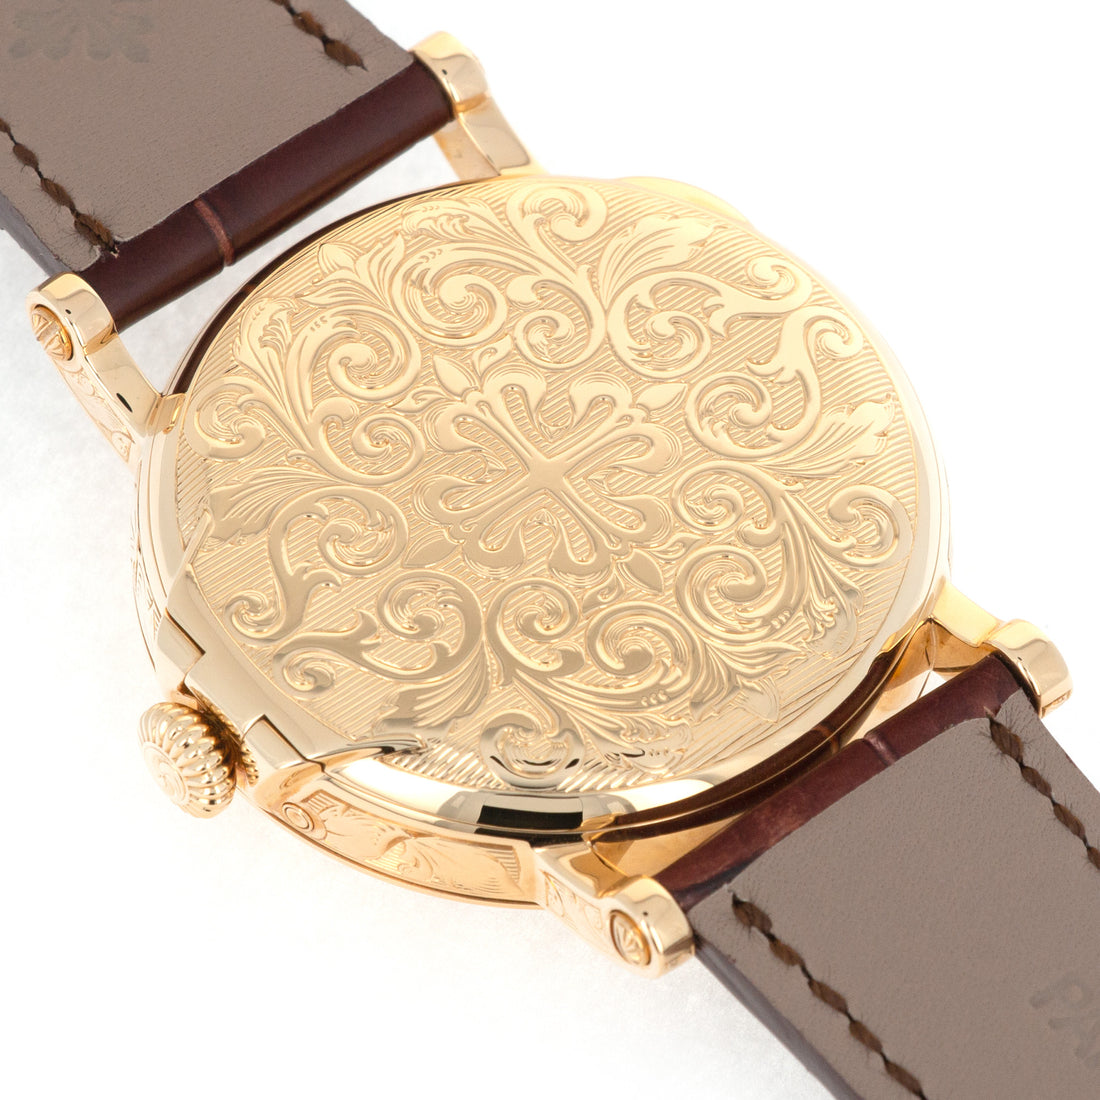 Patek Philippe Yellow Gold Perpetual Hand-Engraved Watch Ref. 5160